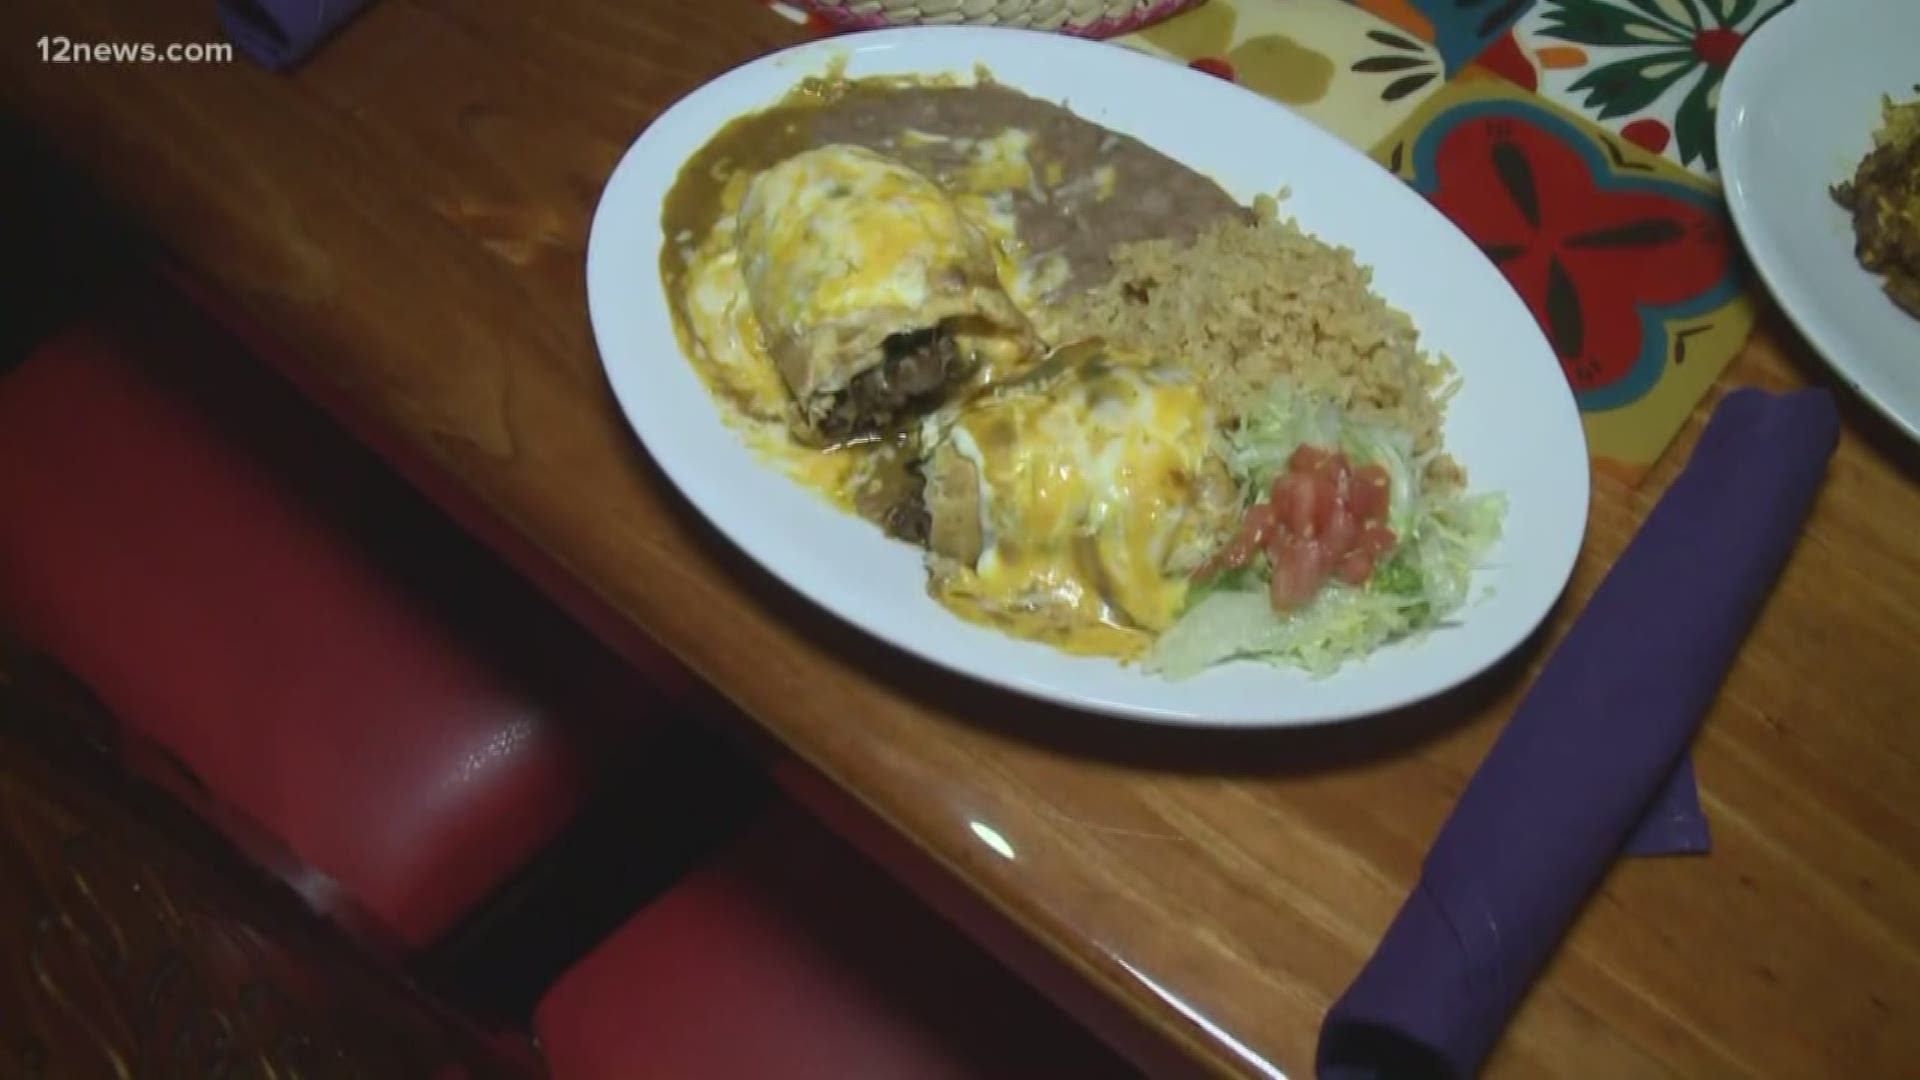 Jimmy Q heads to Surprise on this Must Eat Monday for delicious Mexican food at Rio Mirage.